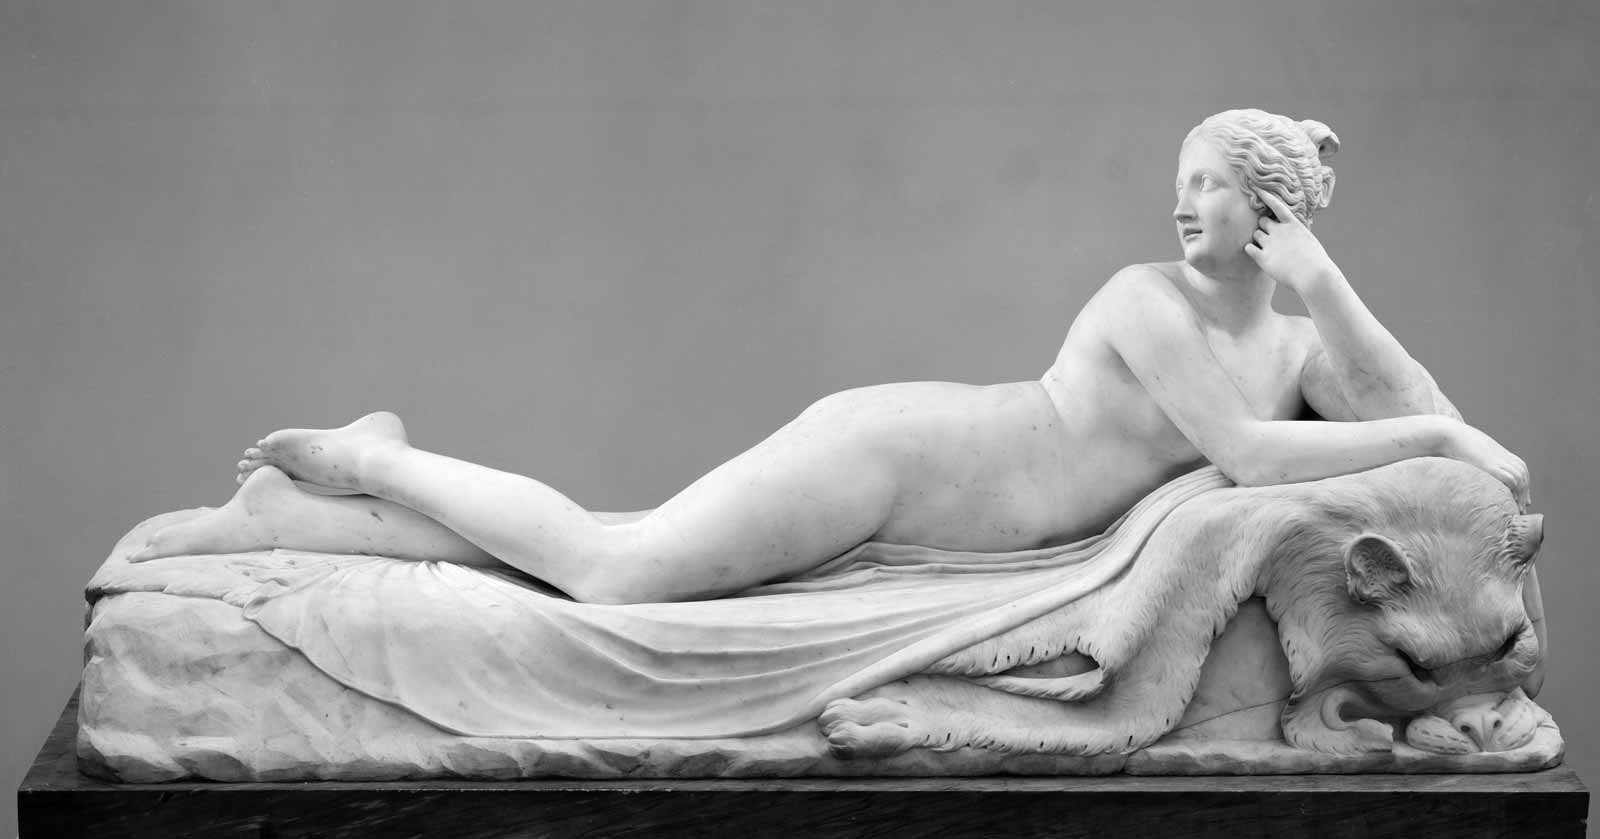 The Ground-breaking Innovations of Sculptor Antonio Canova A